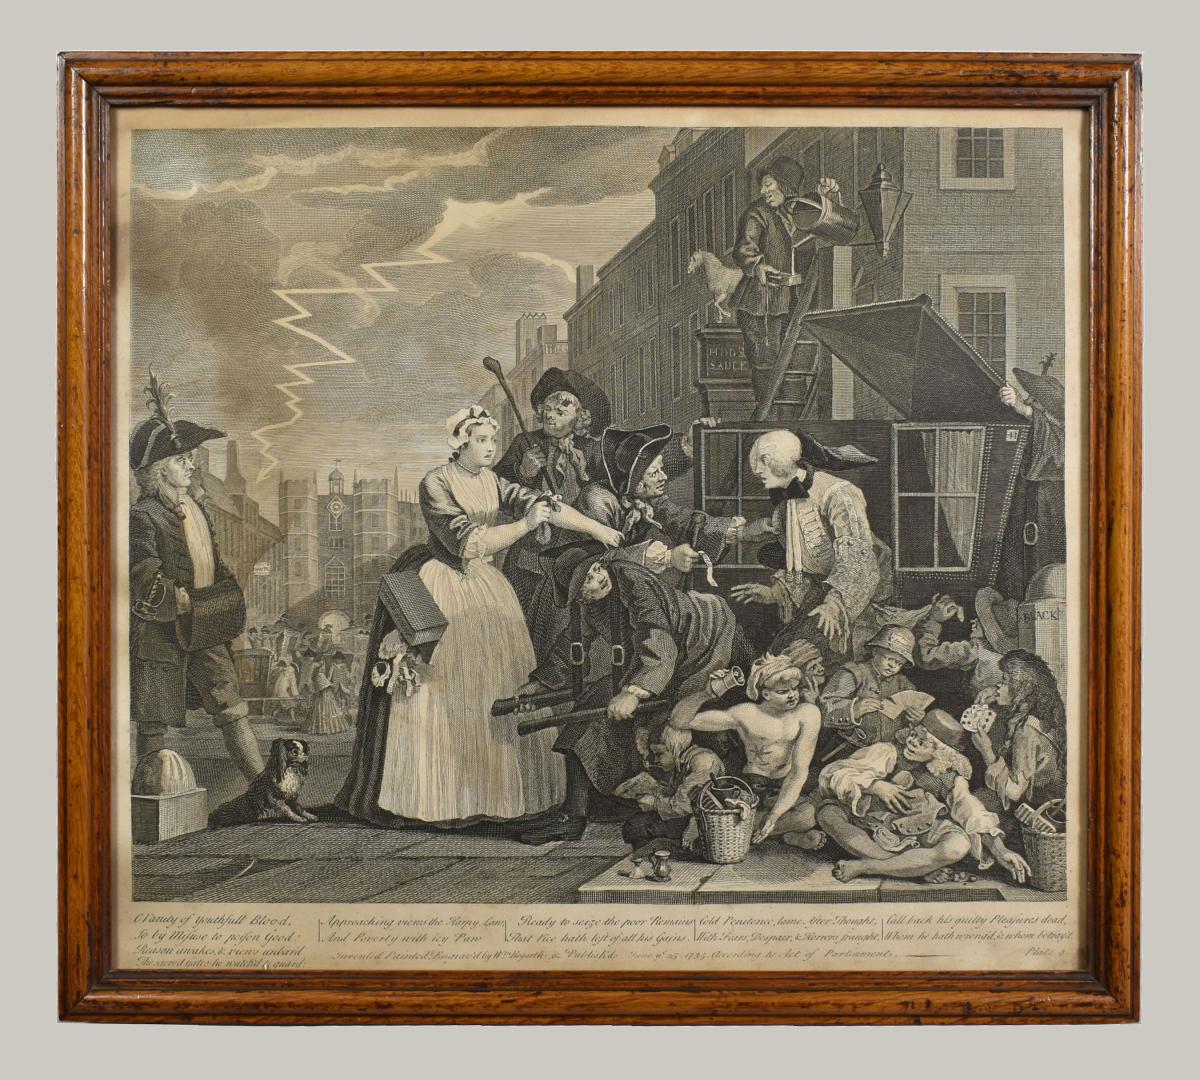 A set of eight engravings of the Rake’s Progress after Hogarth, c.1750